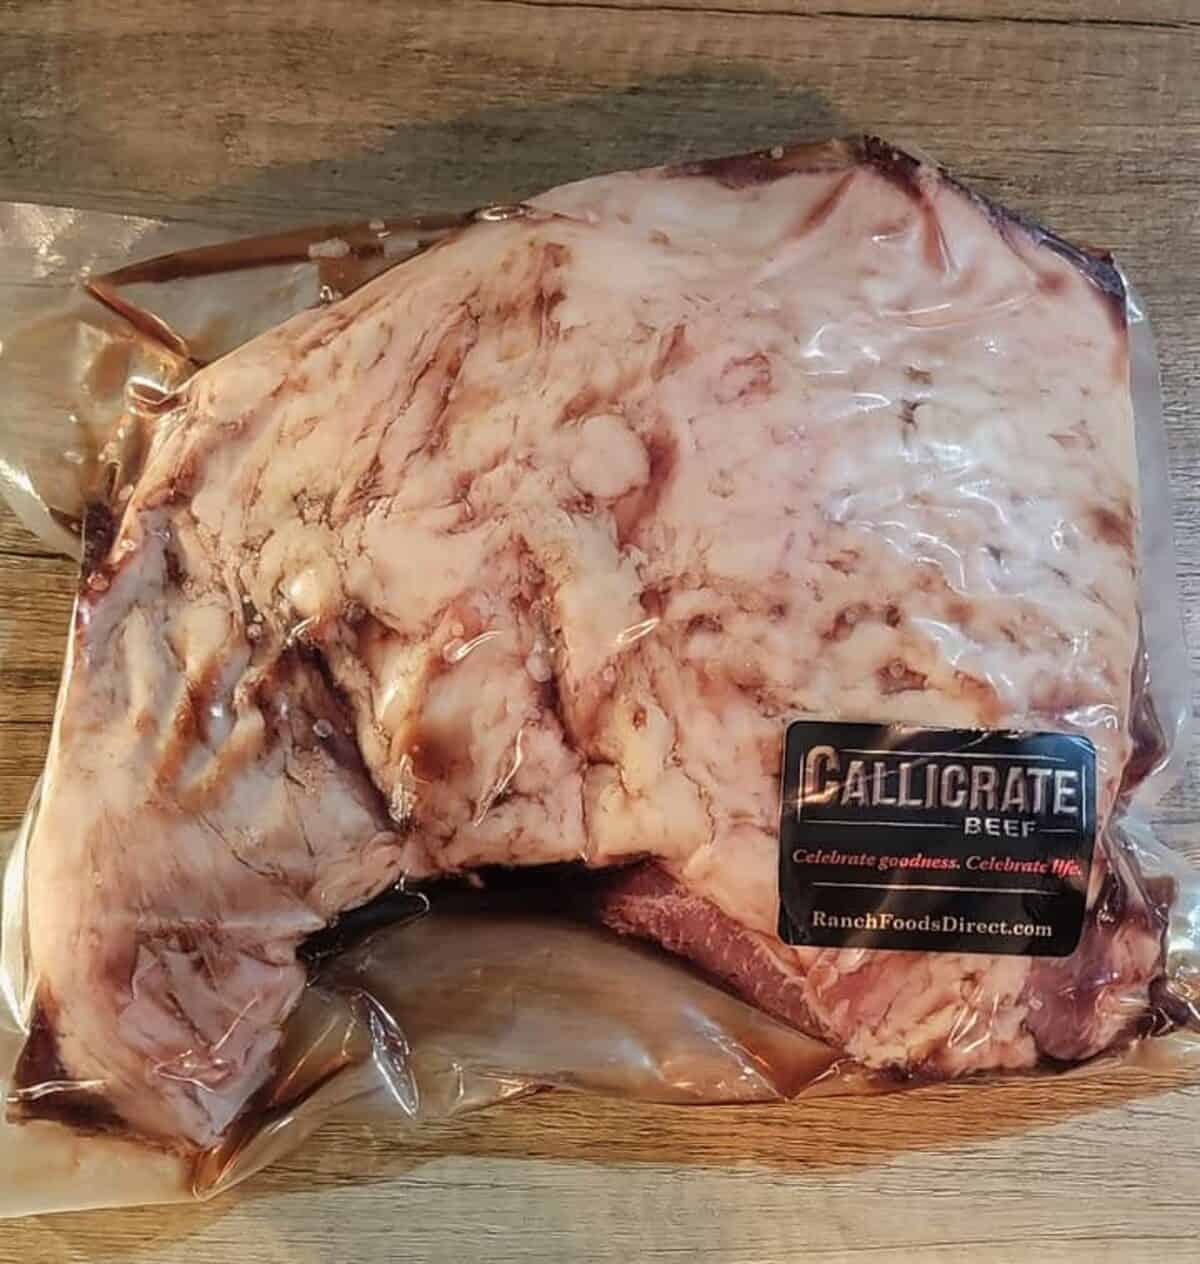 plastic wrapped tri tip, raw, labelled as Callicrate brand